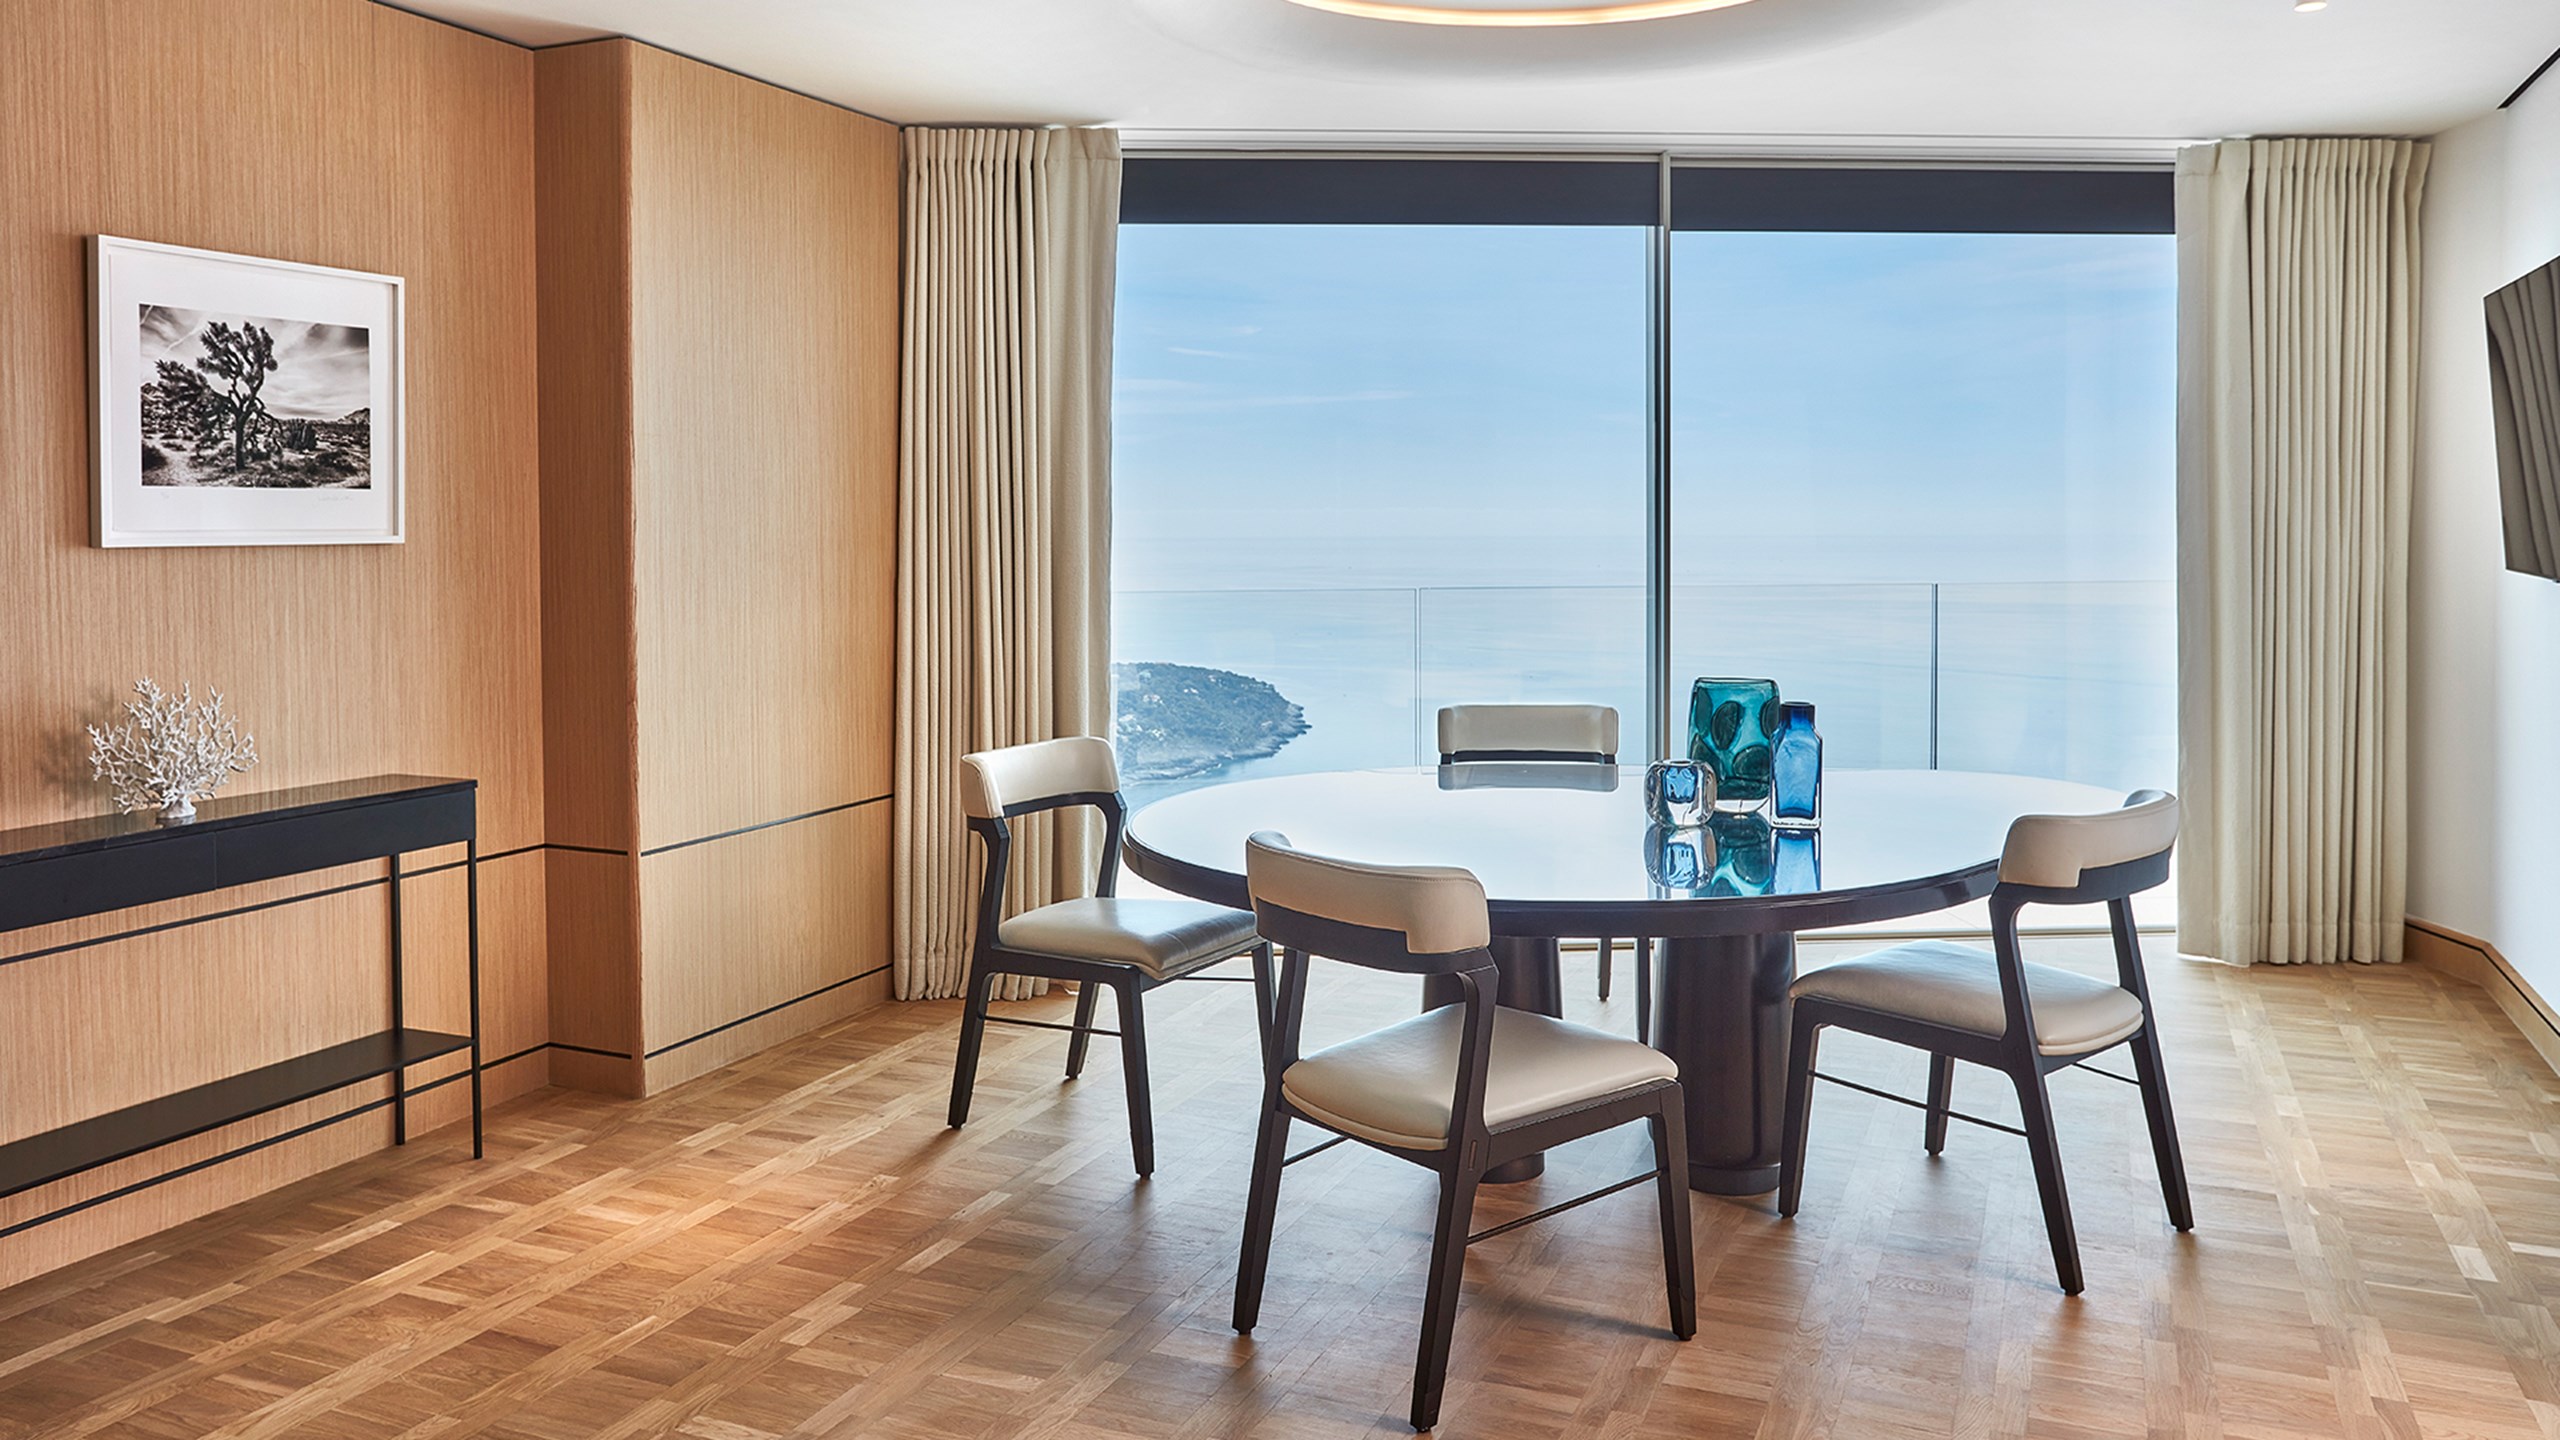 Grand Riviera Suite dining room with a large round table, dining chairs and floor-to-ceiling window with a view on the sea.